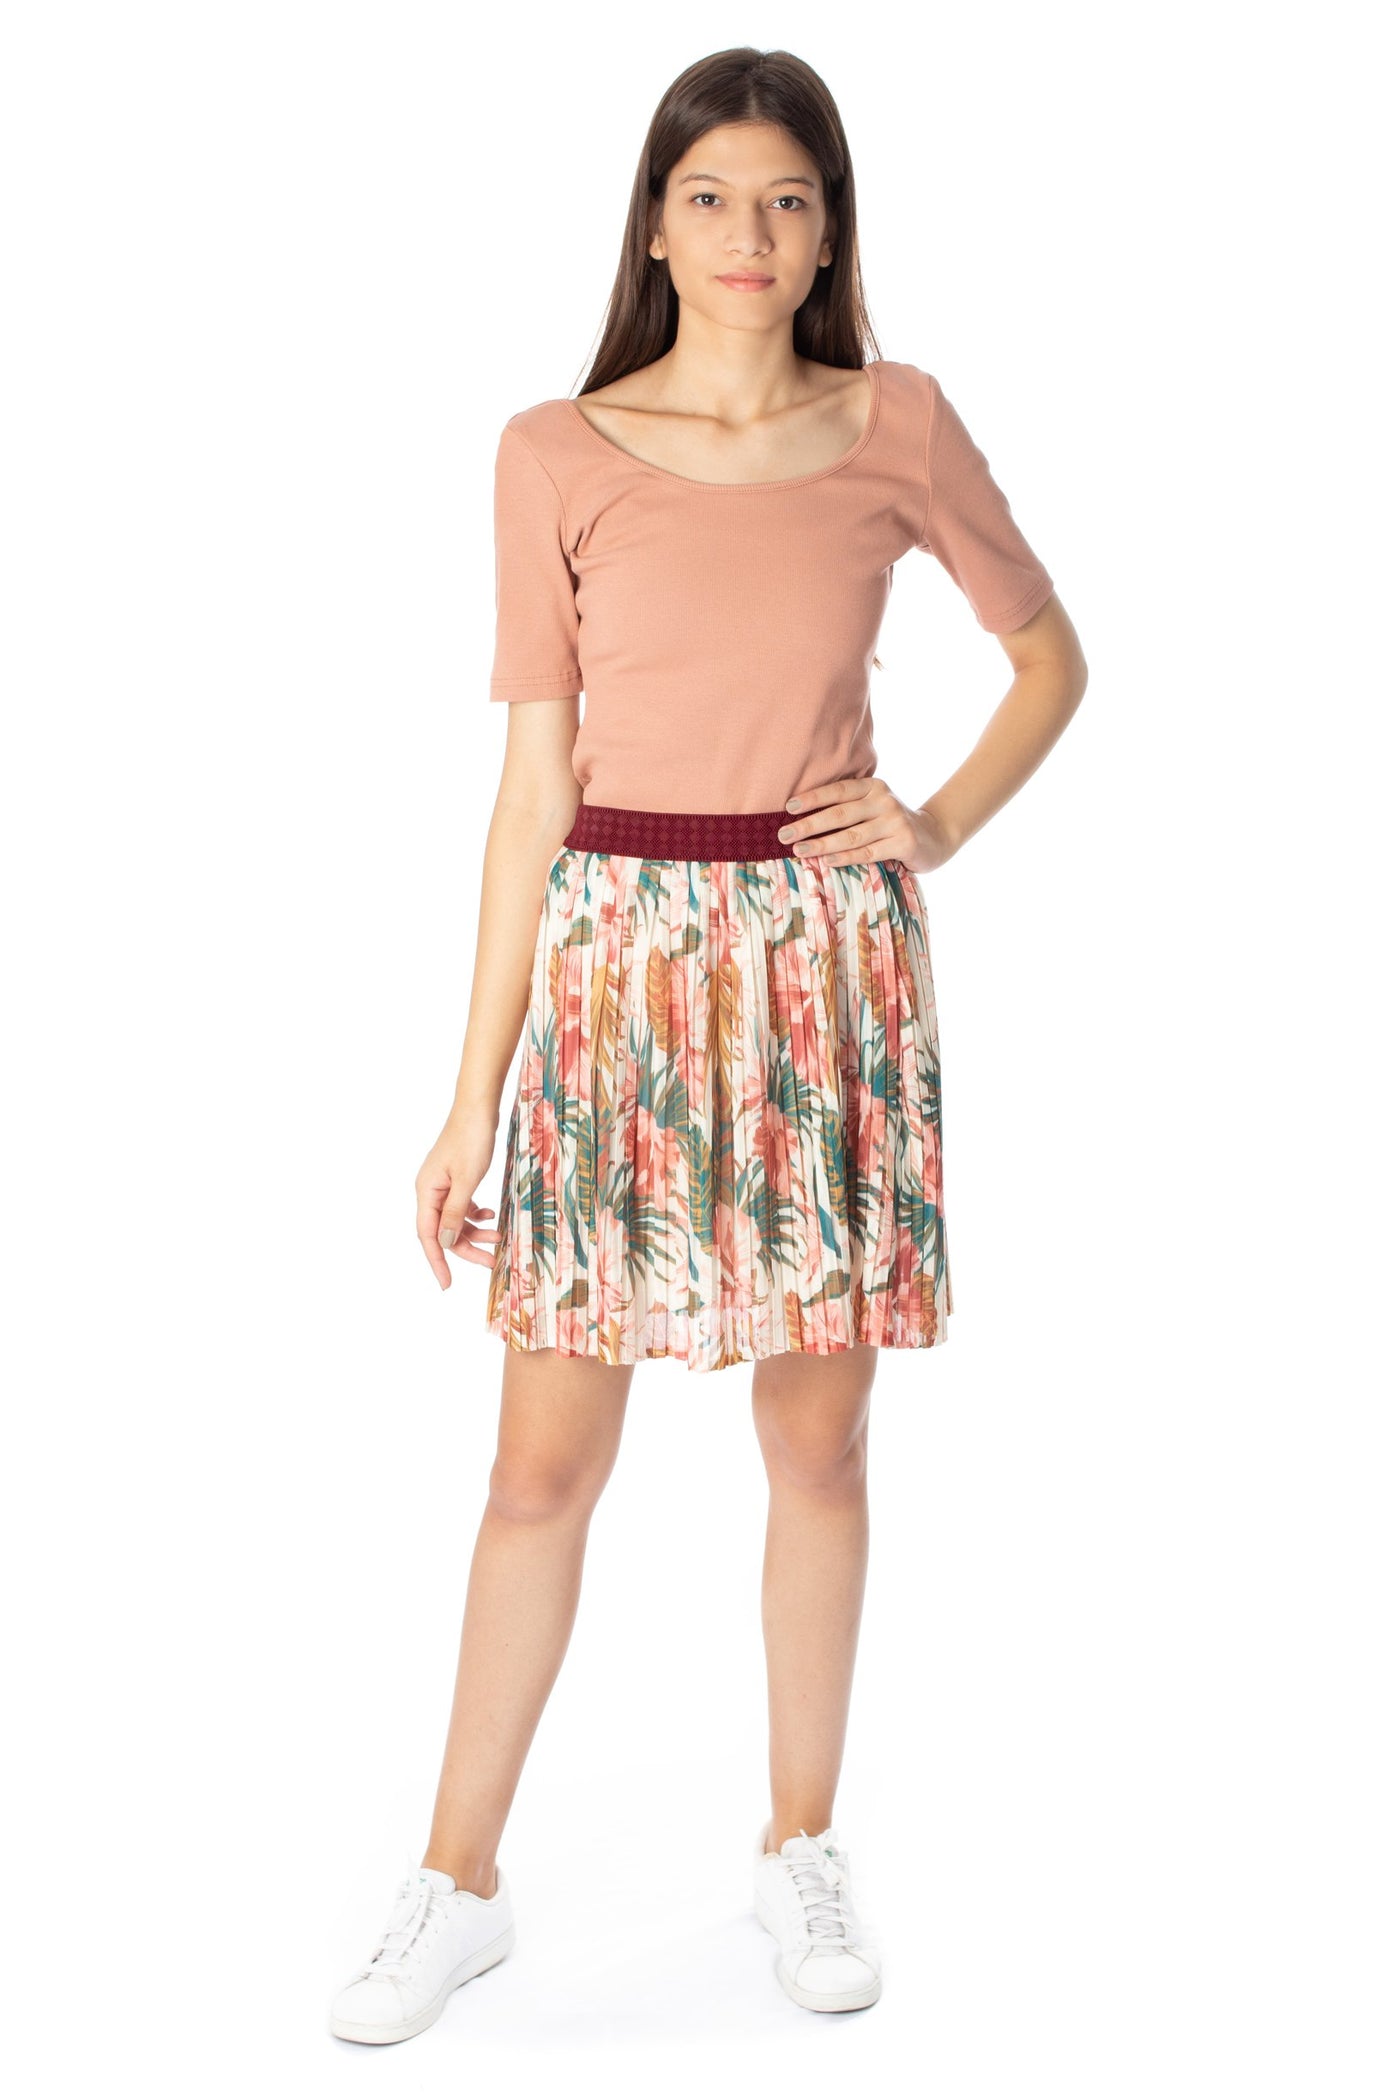 chassca floral printed midi pleated skirt - Breakmood